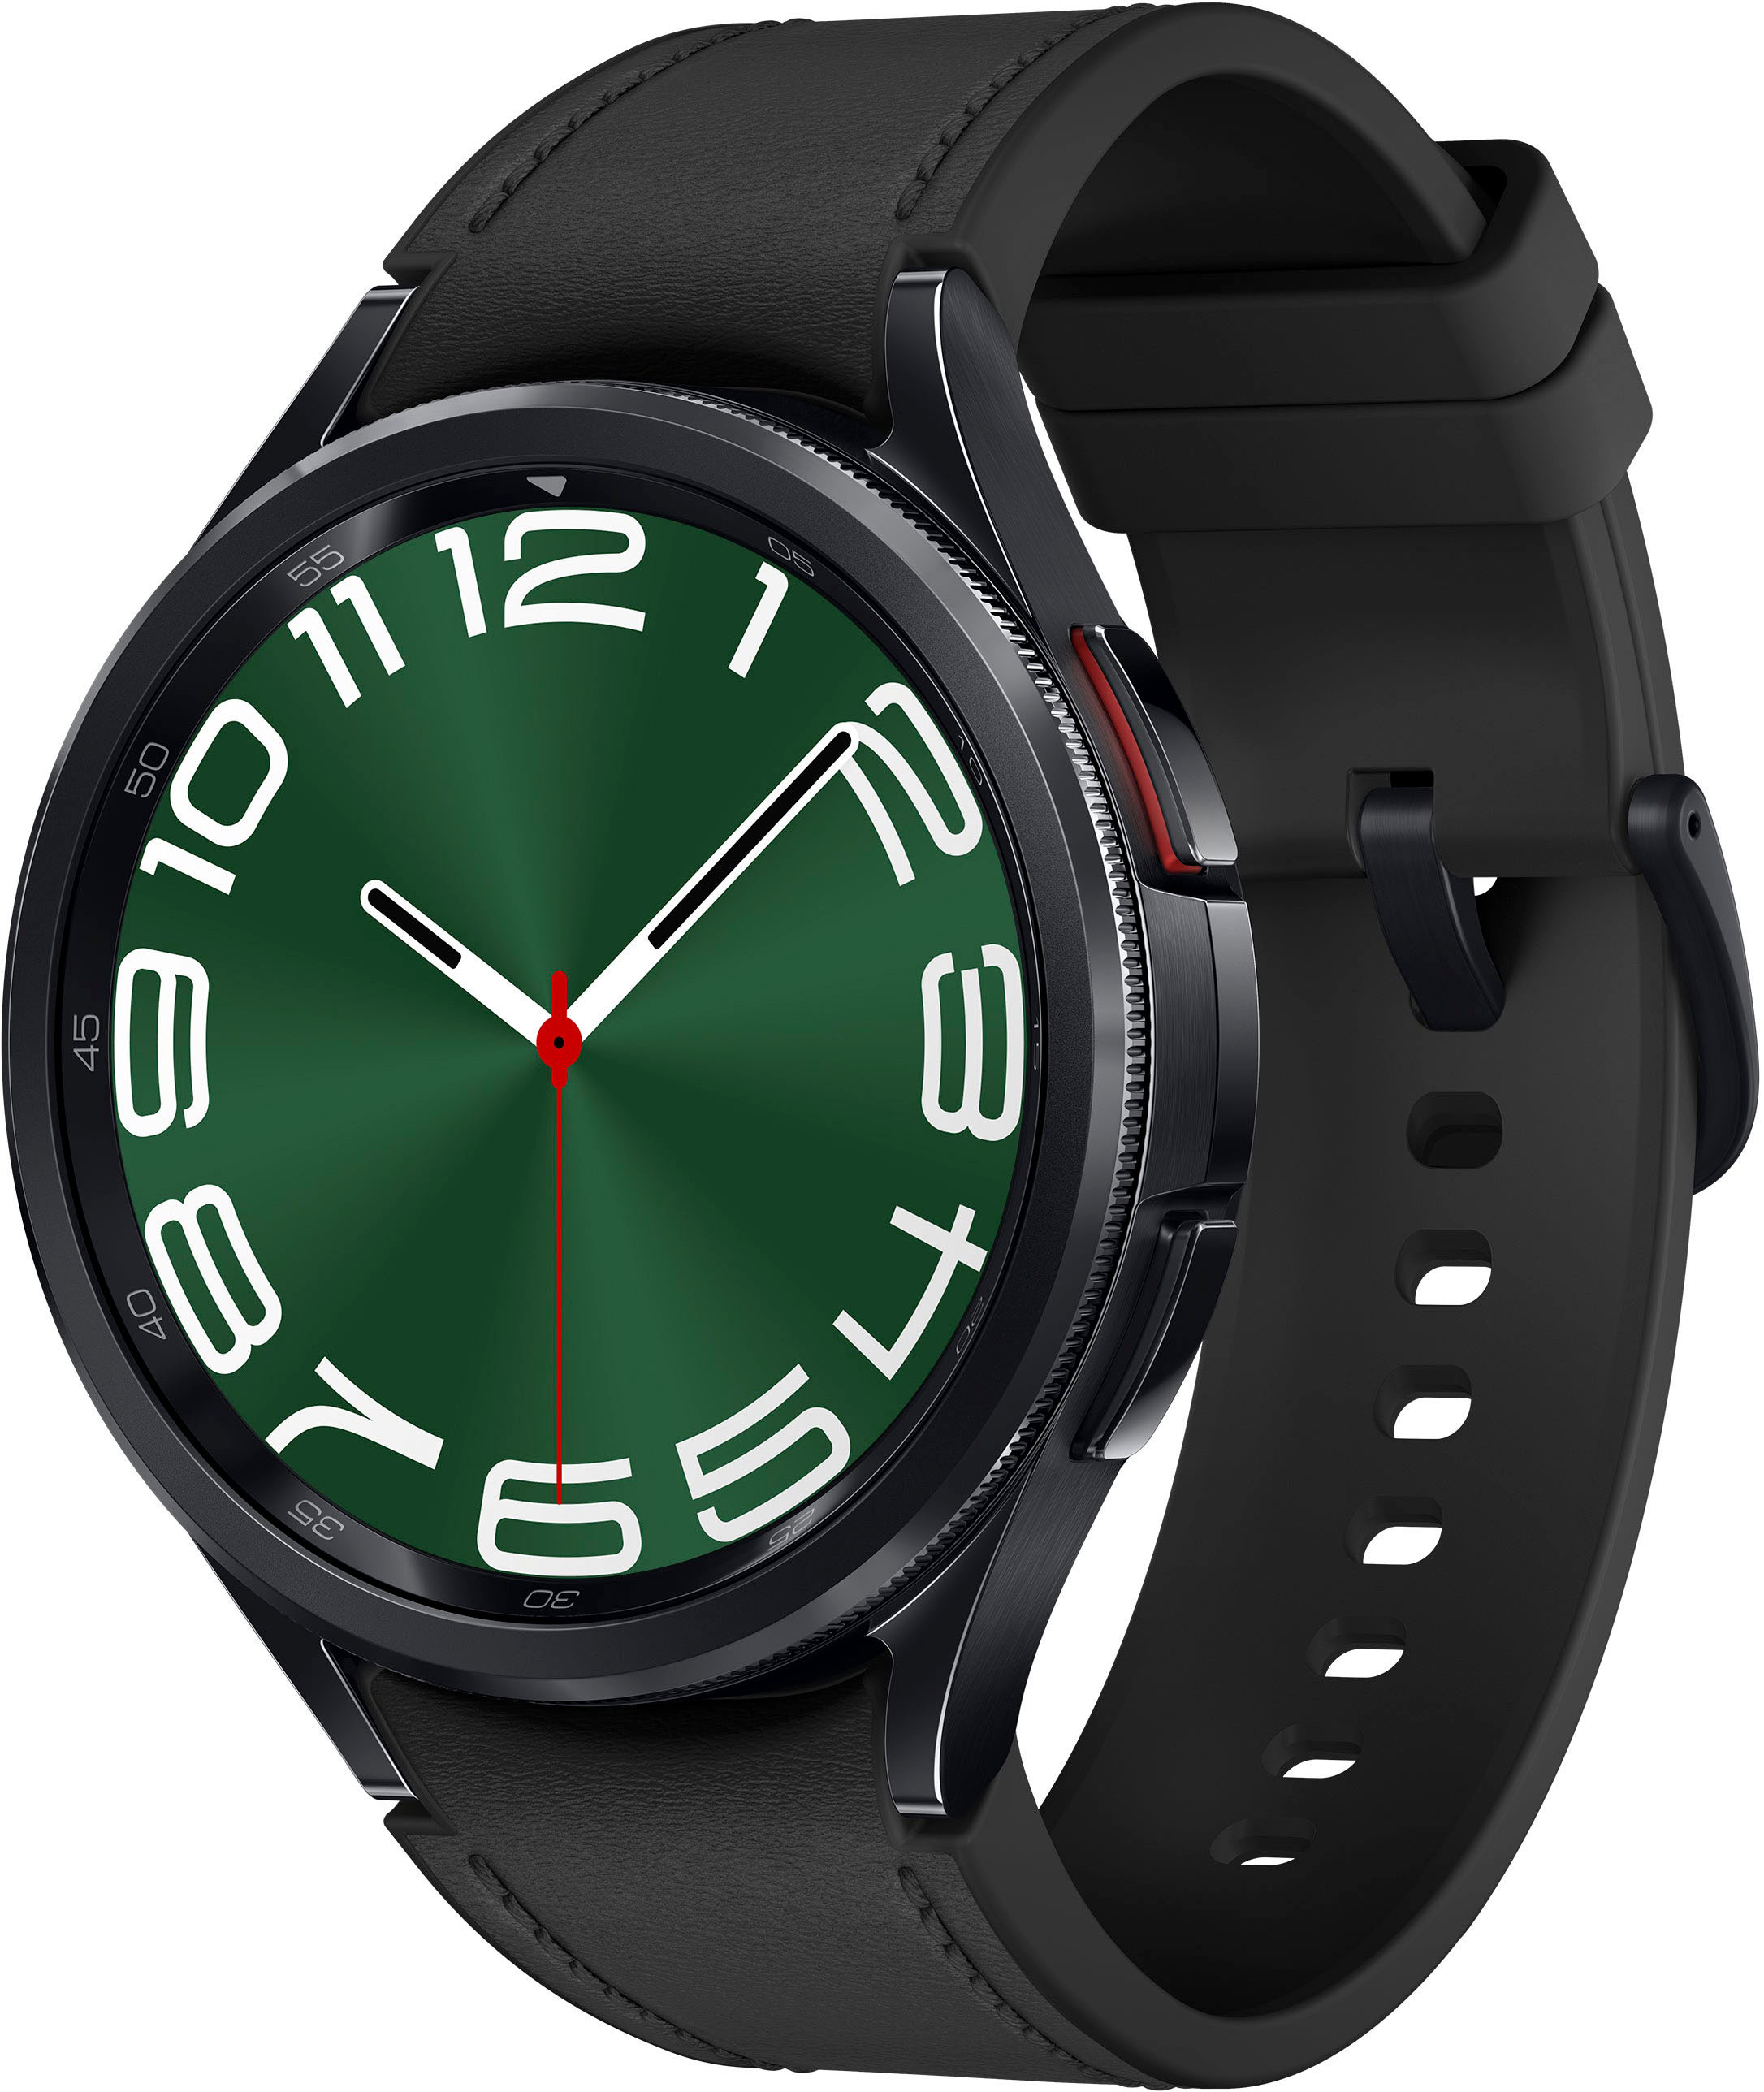 Galaxy Watch6 Pro Cheap Smartwatch 1.43 Inch HD Big Screen, NFC, Game,  Stopwatch, Bluetooth Calls, Cool Design For Men And Women TF6 T5 And Watch5  From Twsbandgamecase, $17.42